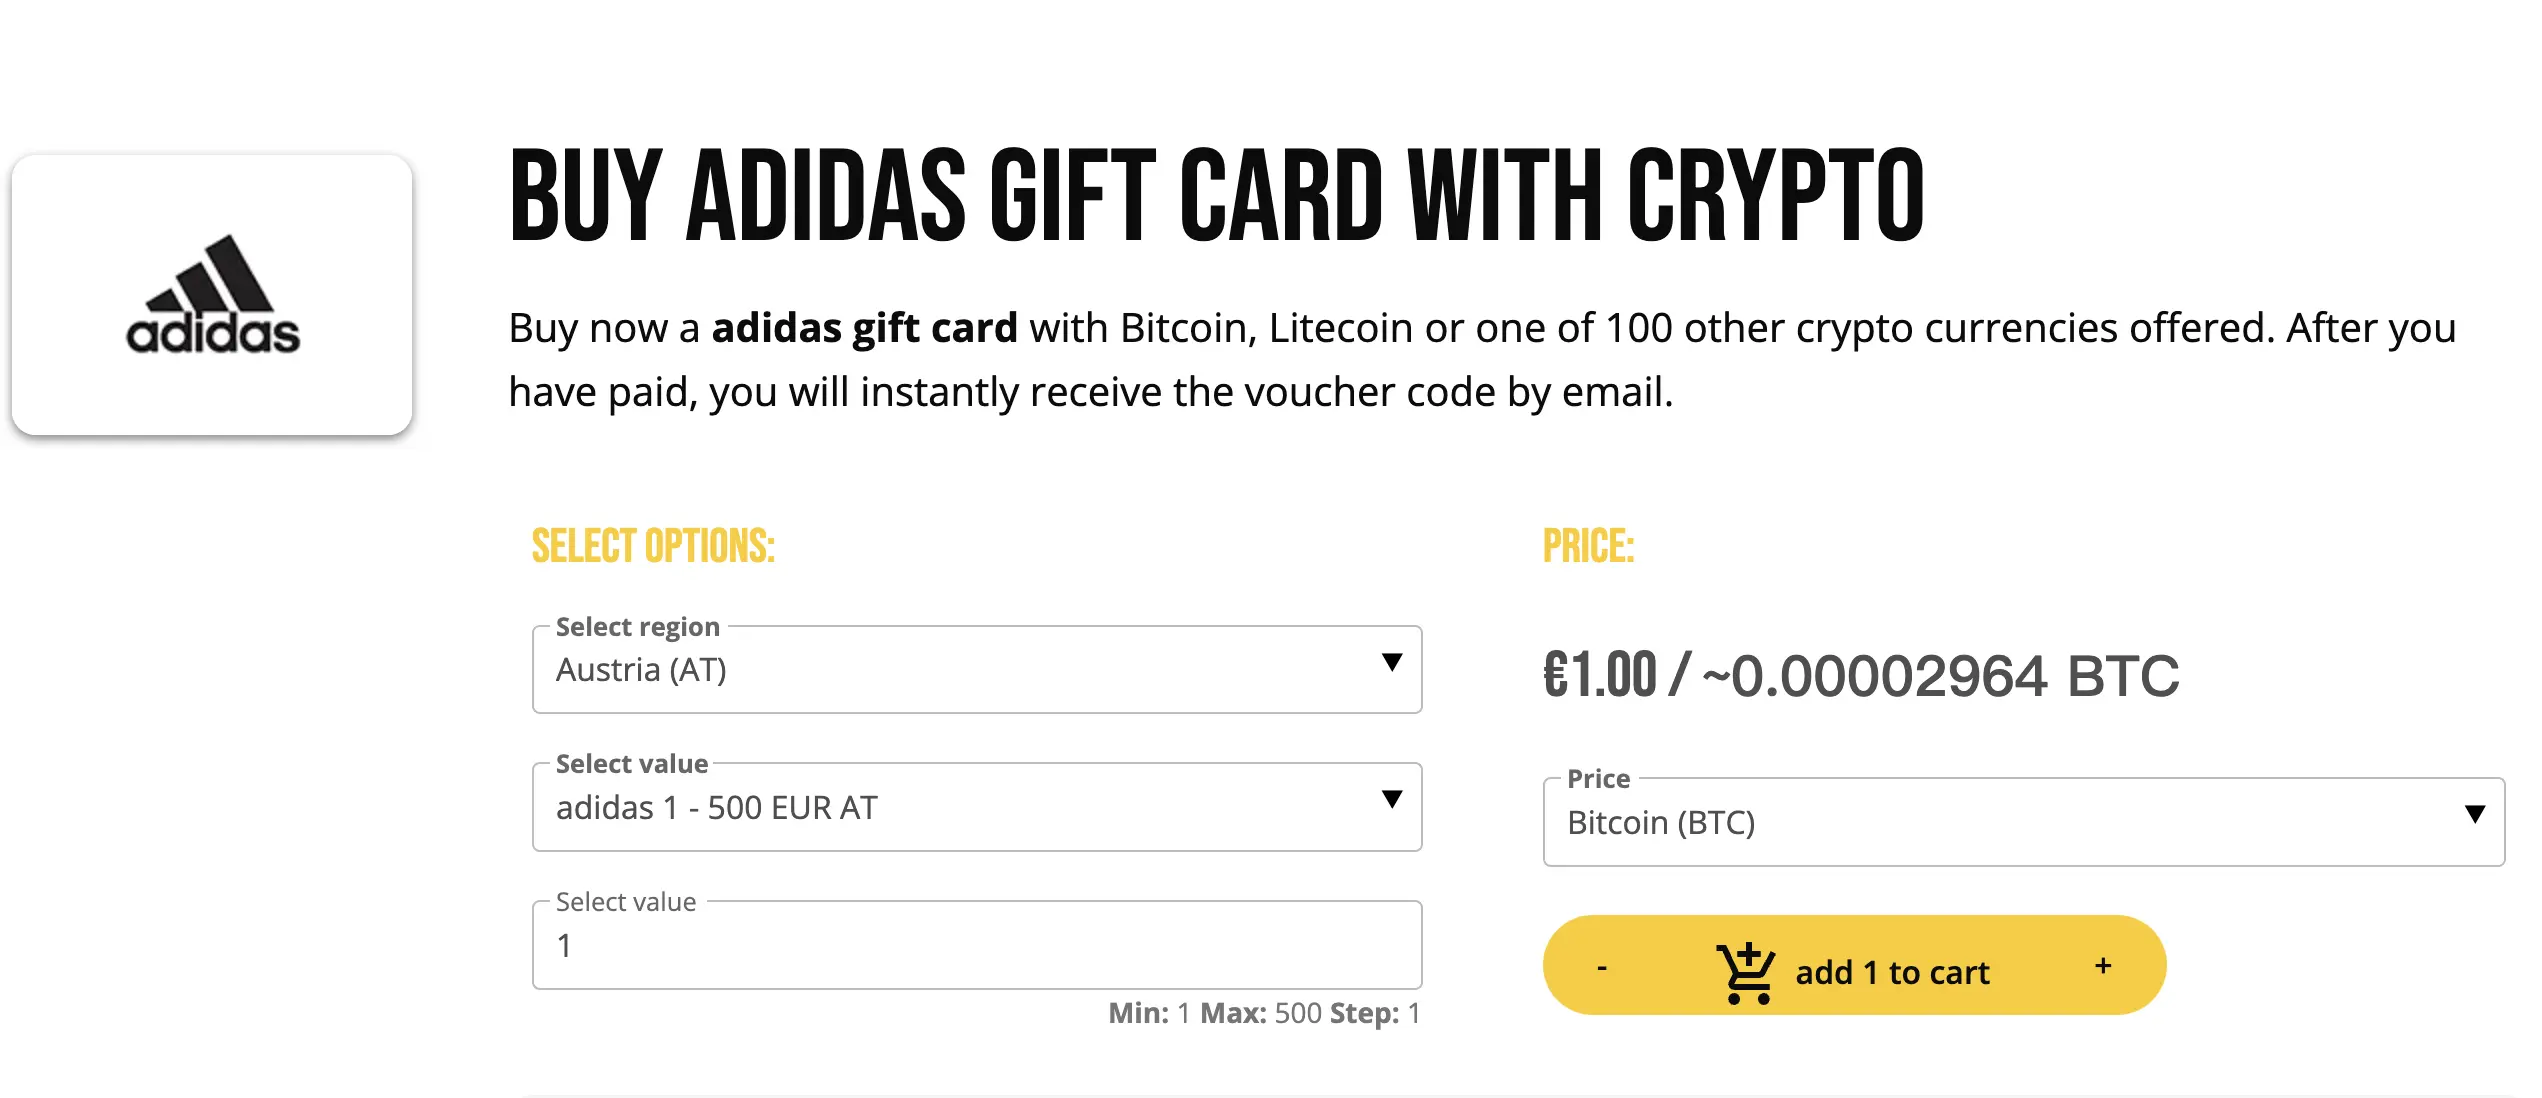 -adidas allow to use bitcoin as payment-